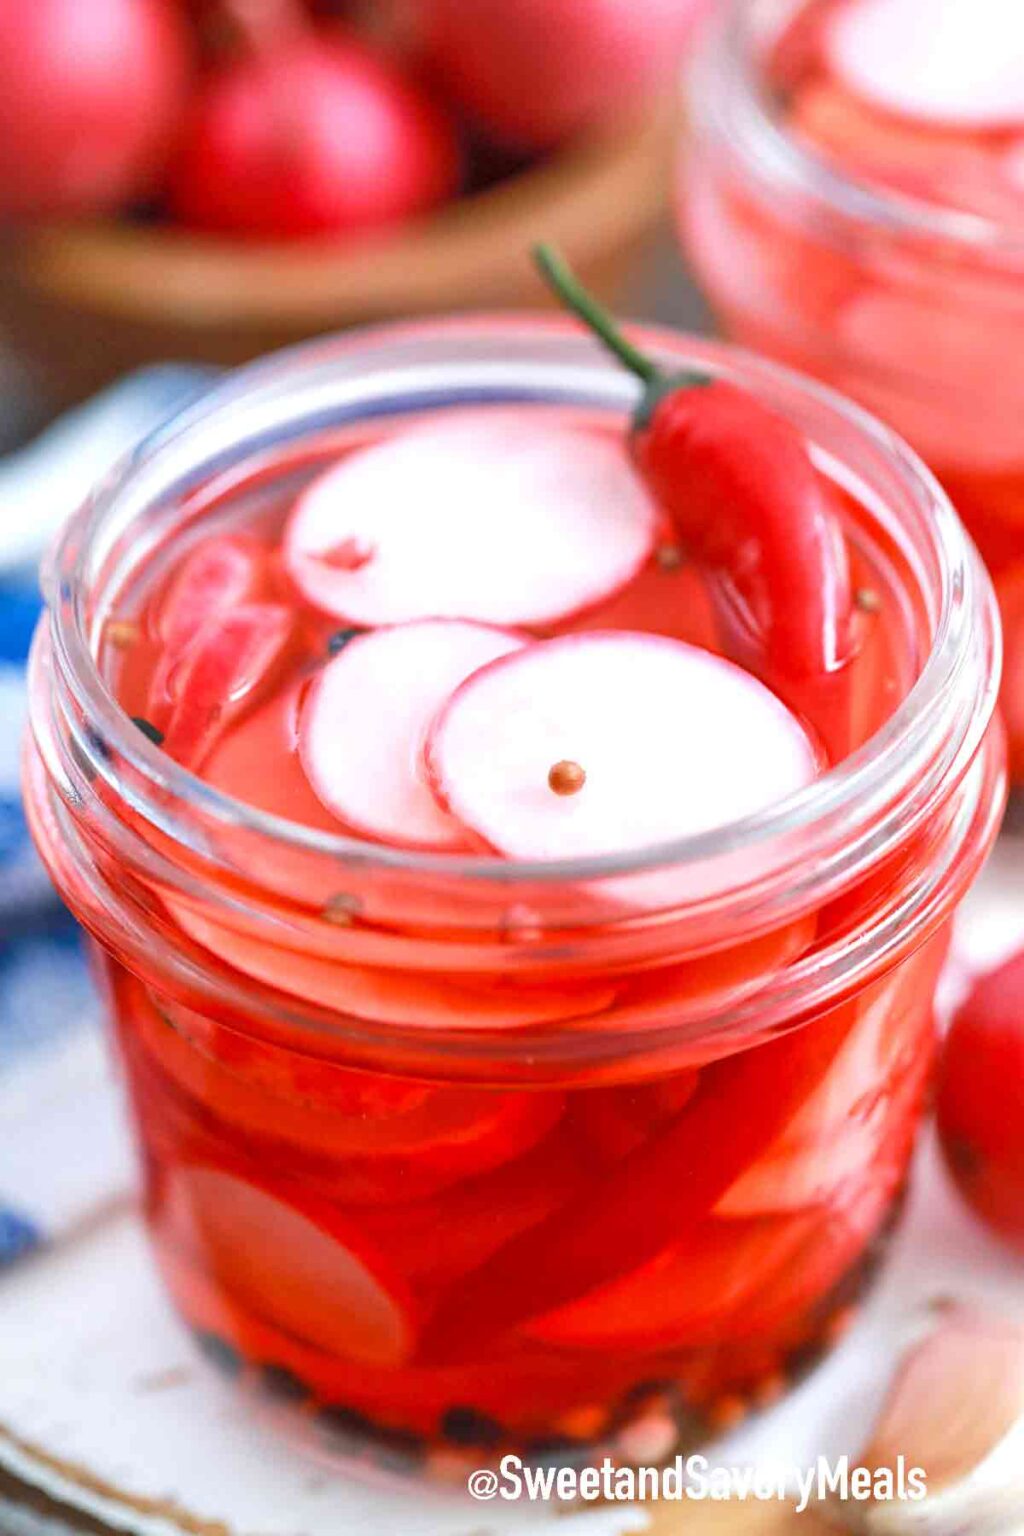 Pickled Radishes Recipe [Video] - Sweet and Savory Meals